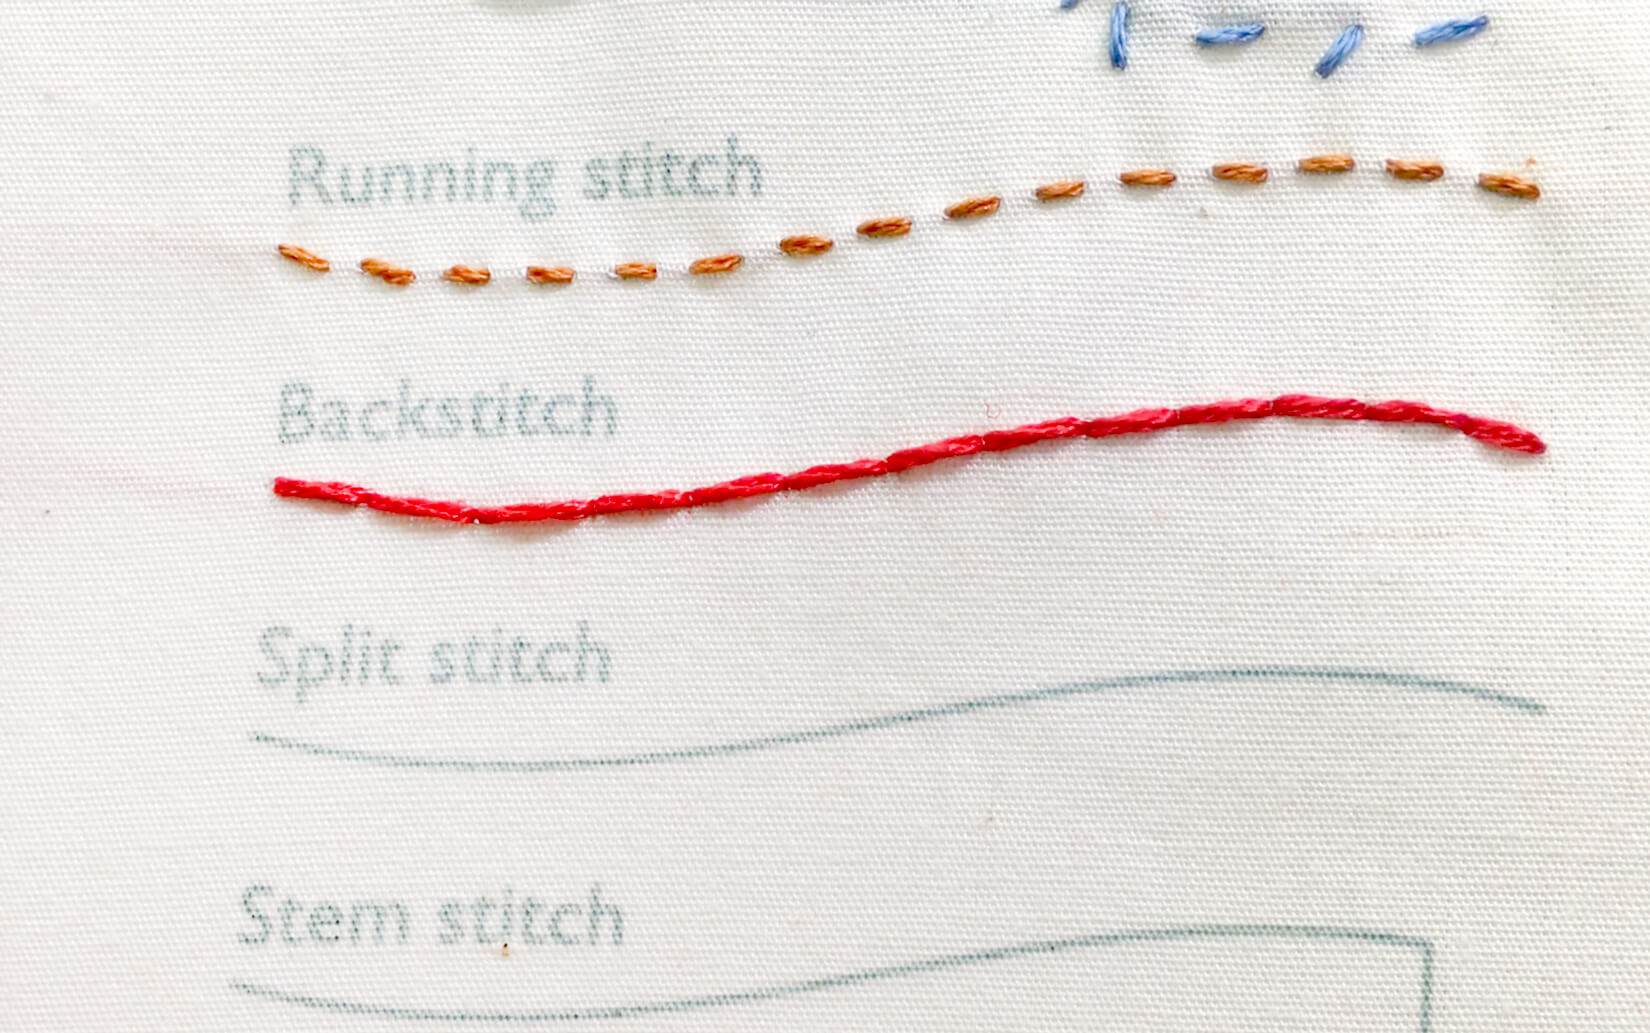 Backstitch - embroidery how-to, quick video, and step by step guide